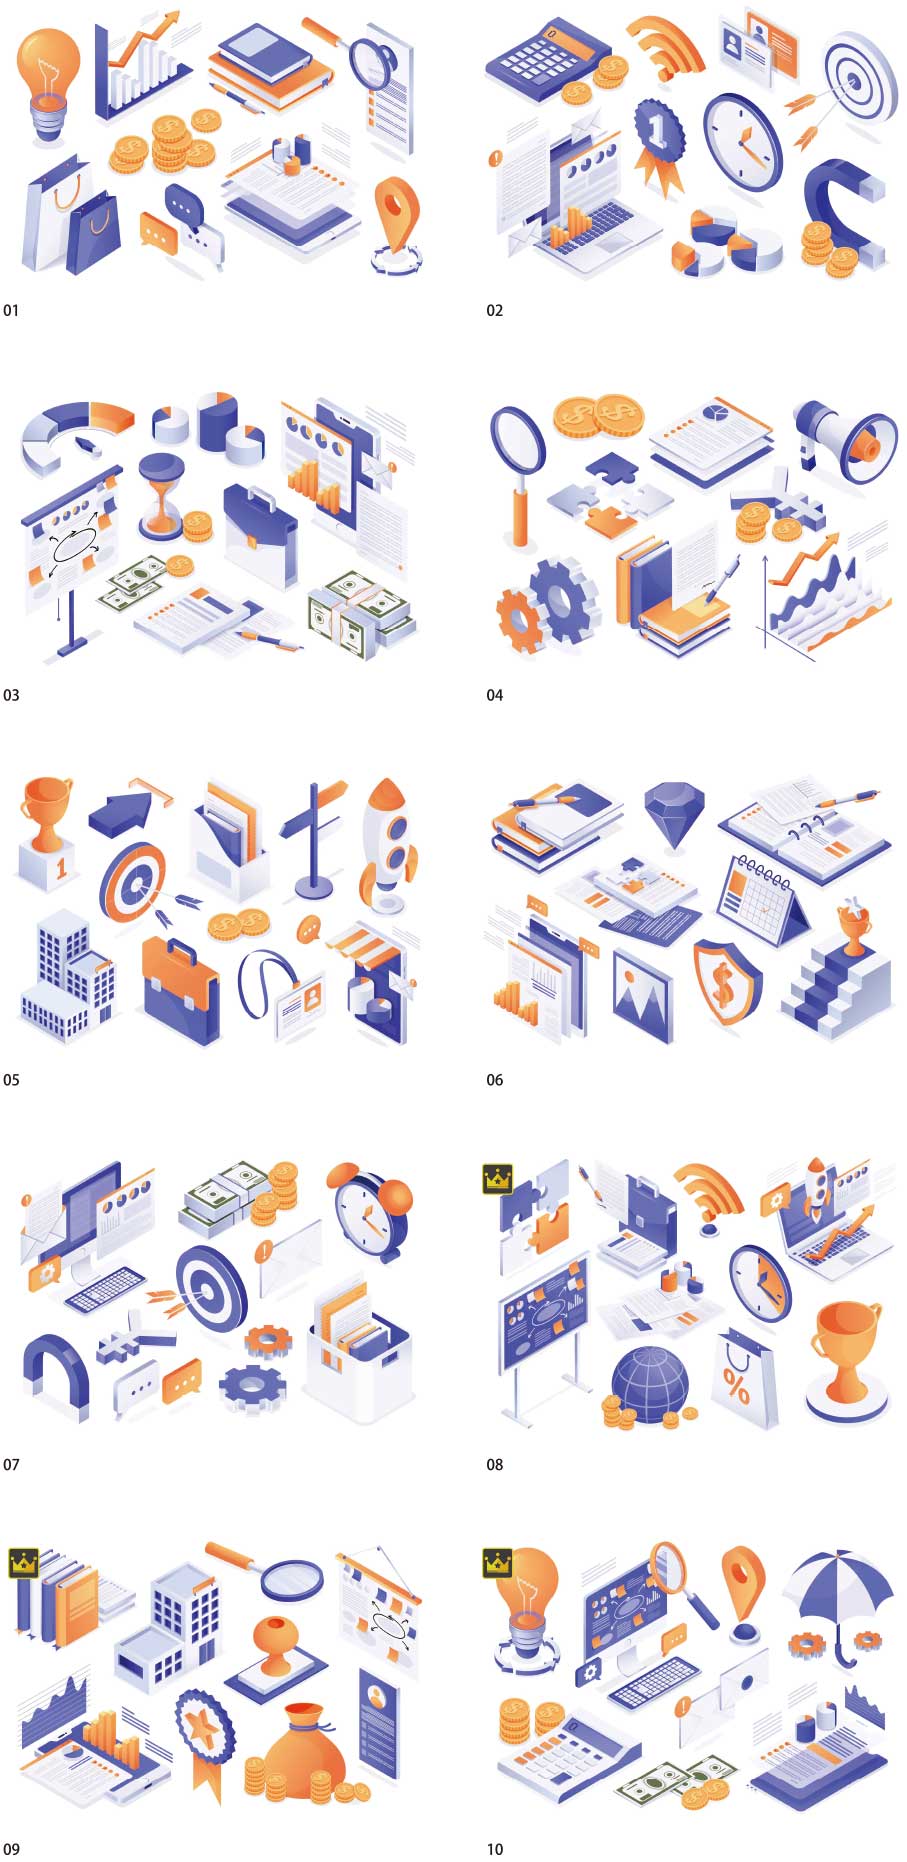 Business isometric illustration collection